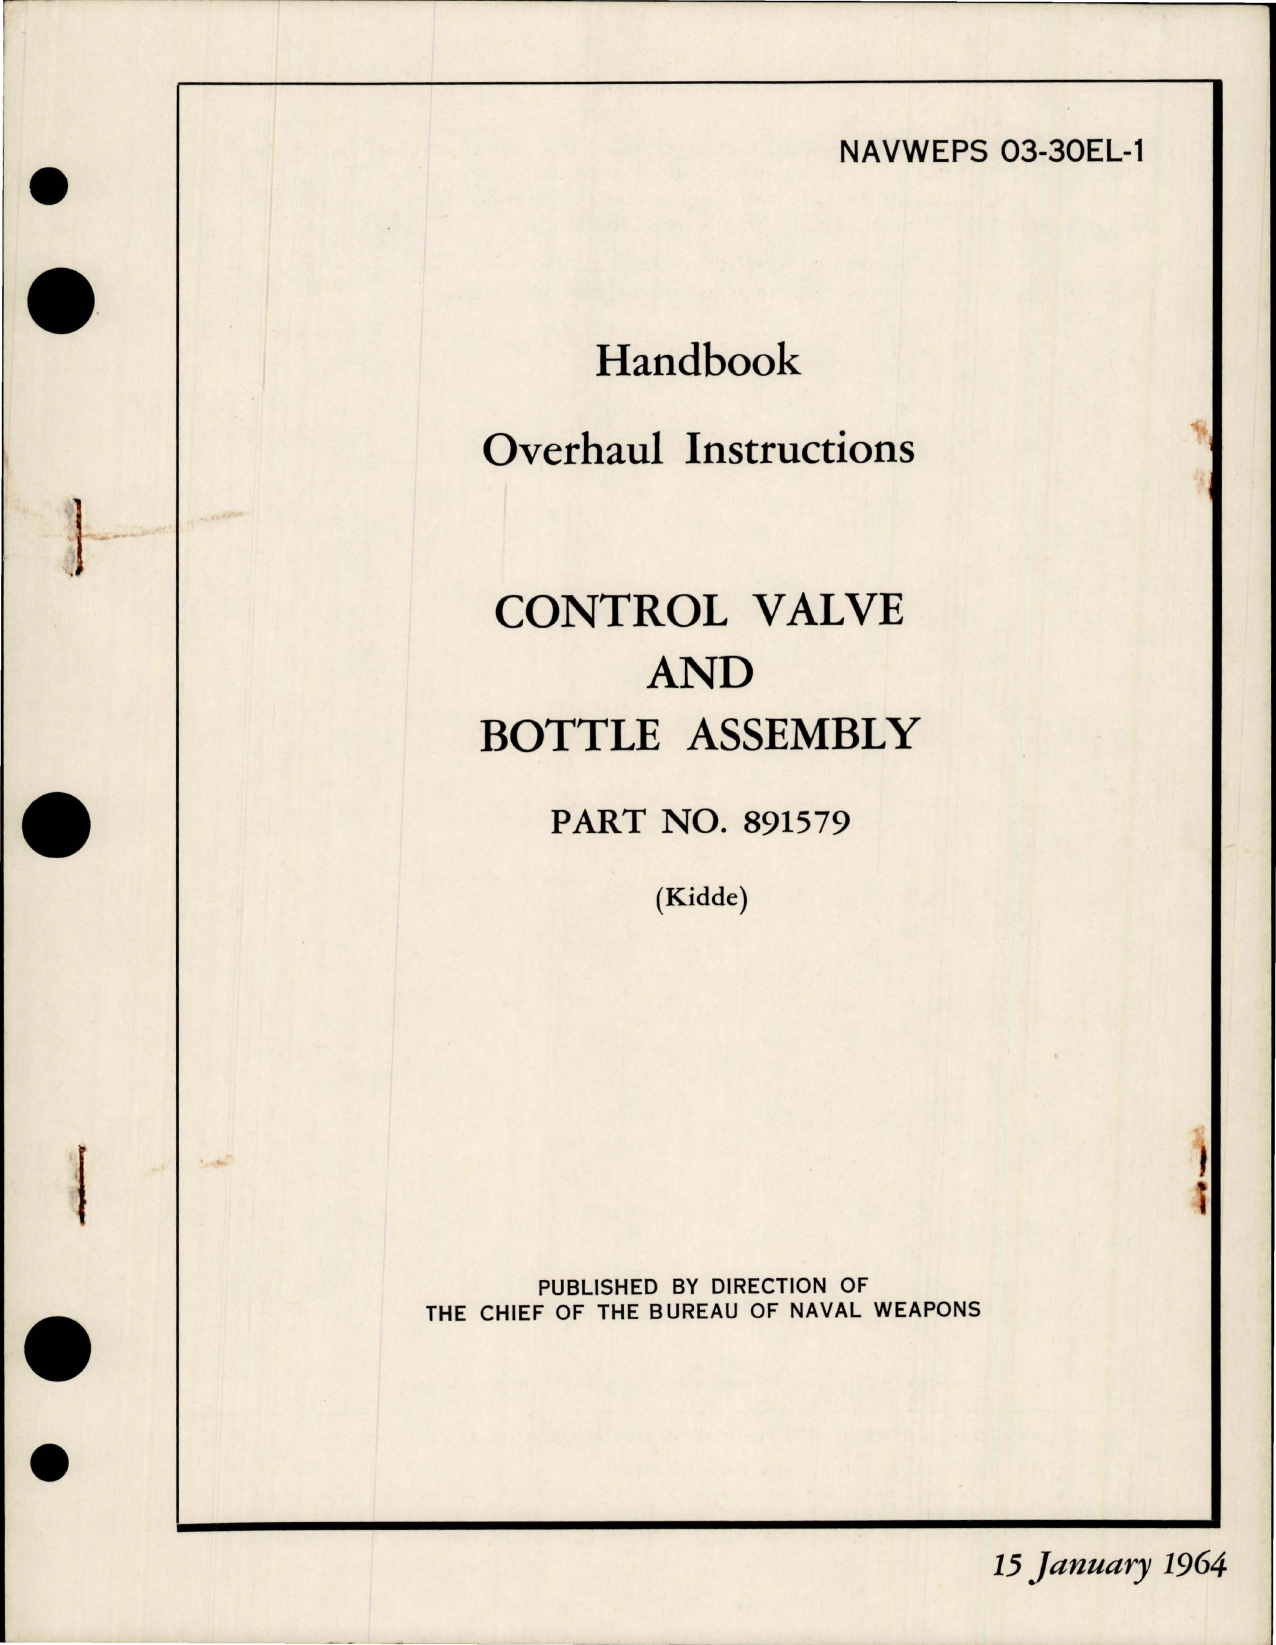 Sample page 1 from AirCorps Library document: Overhaul Instructions for Control Valve and Bottle Assembly - Part 891579 